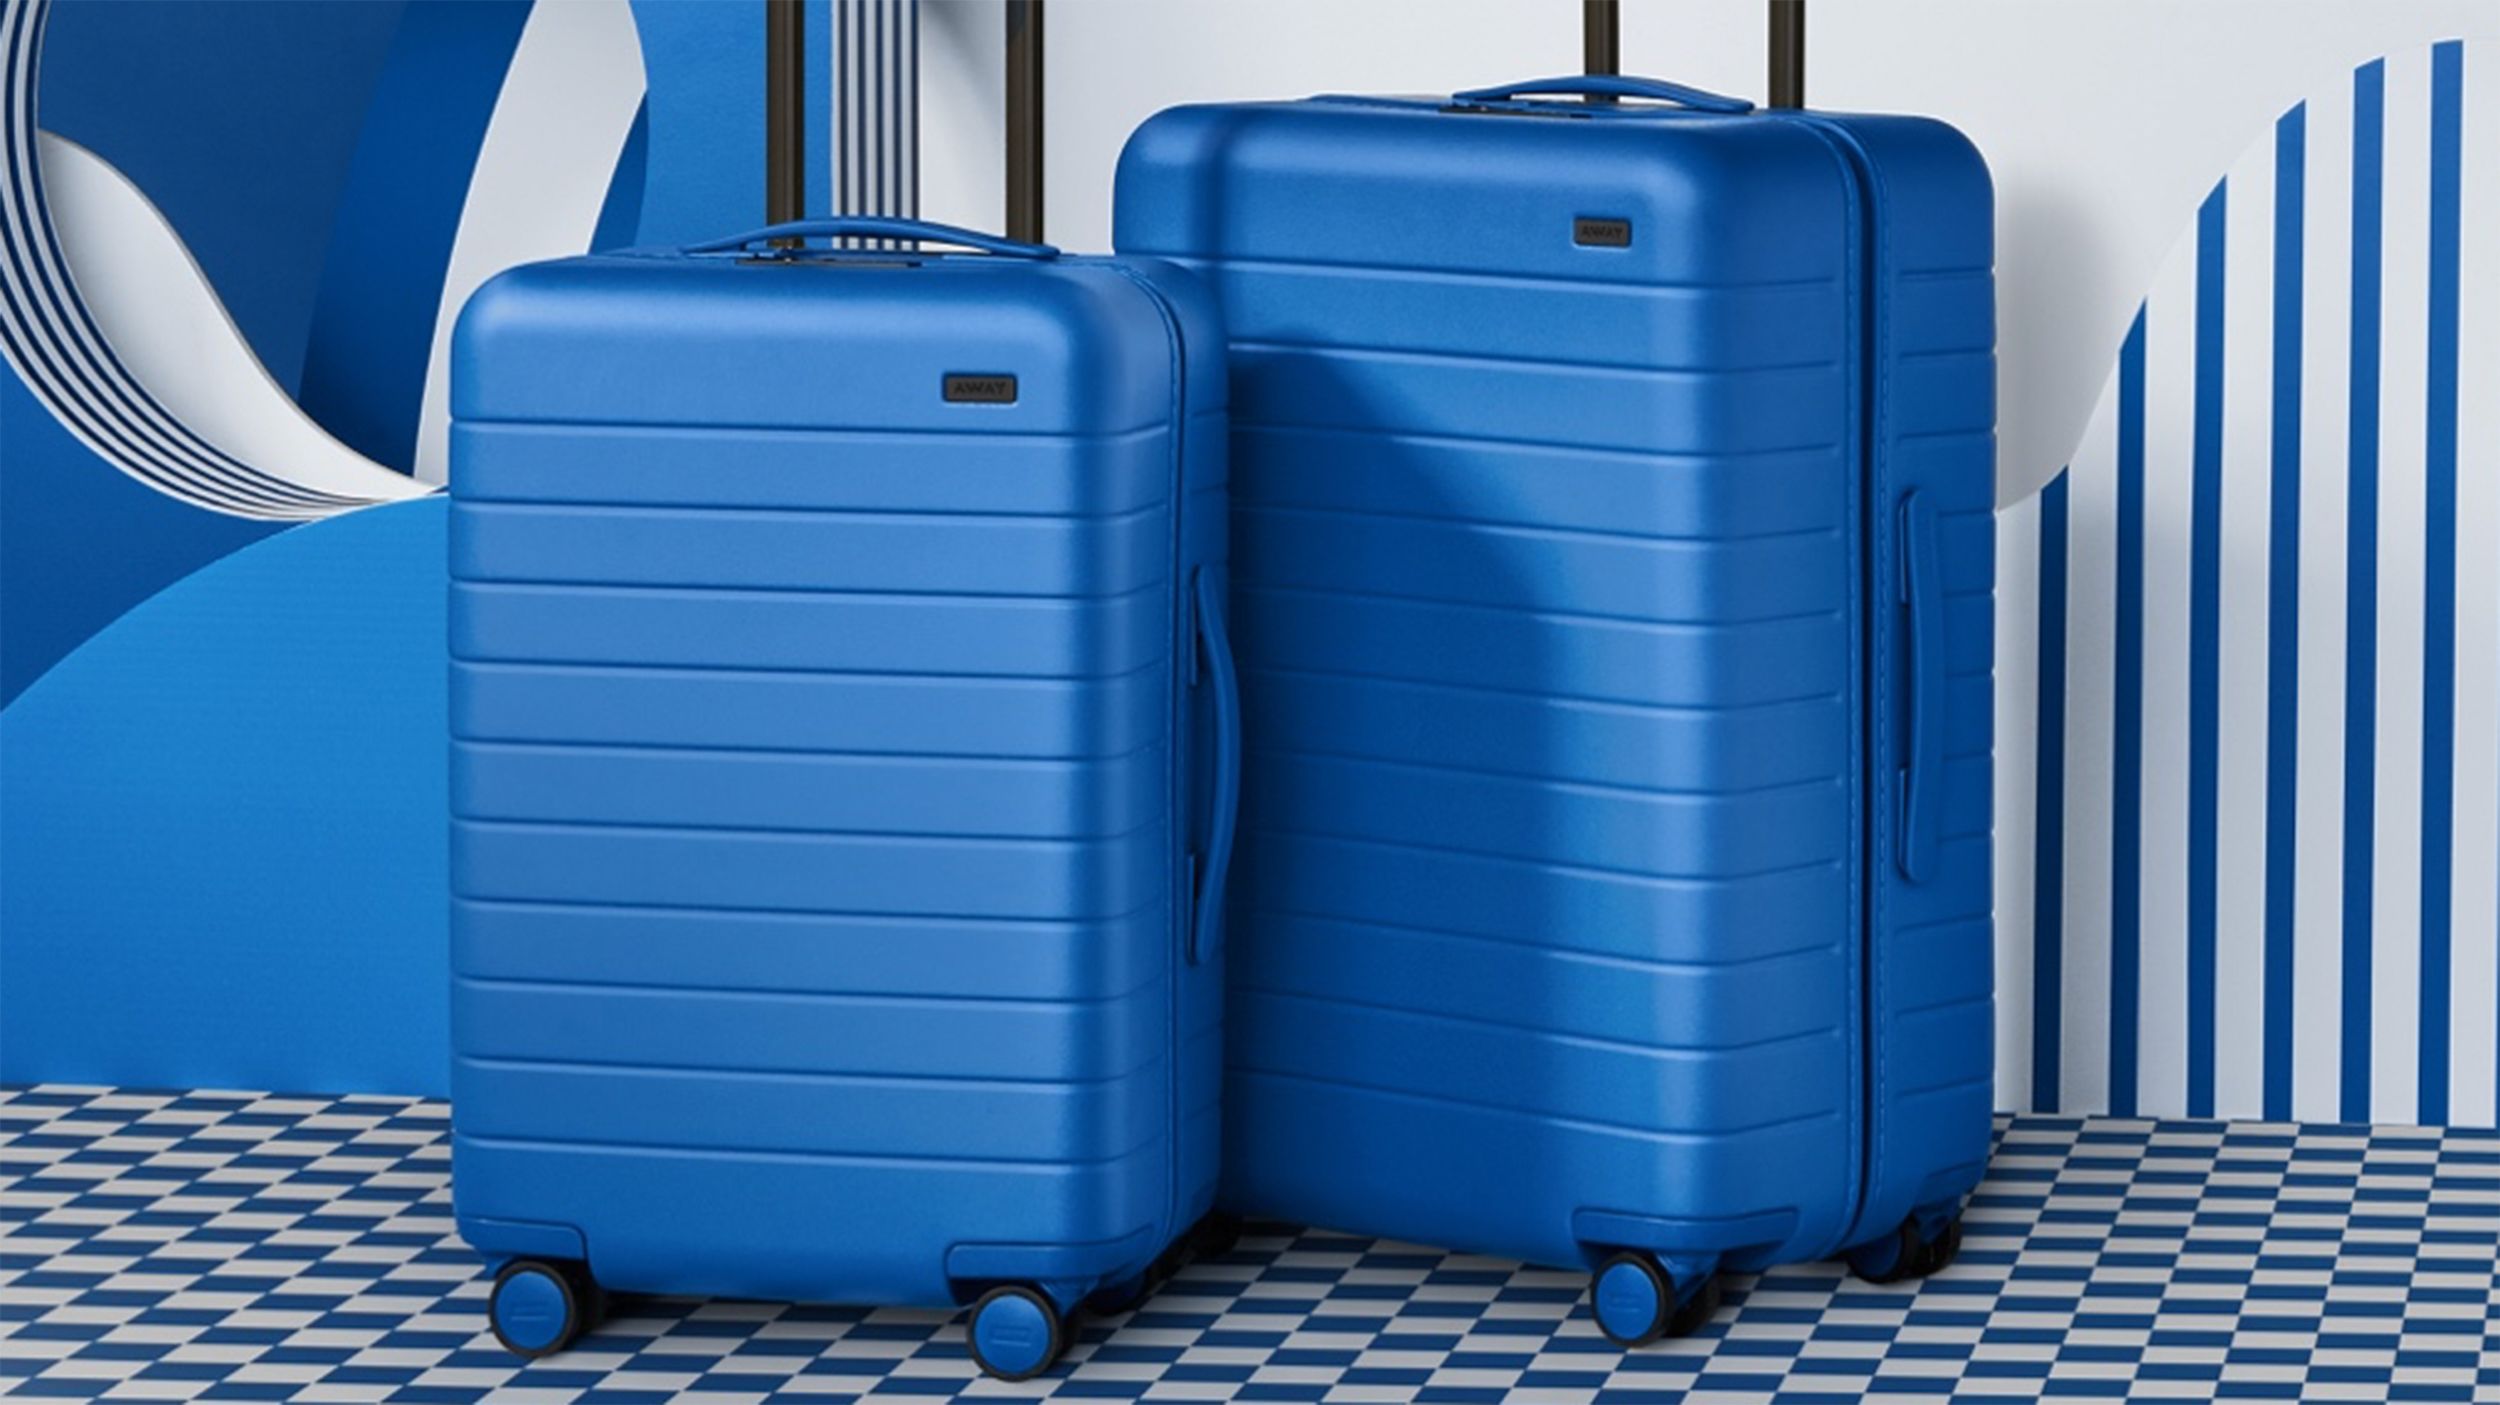 Away Releases Pantone Collection With Classic Blue Luggage | CNN Underscored